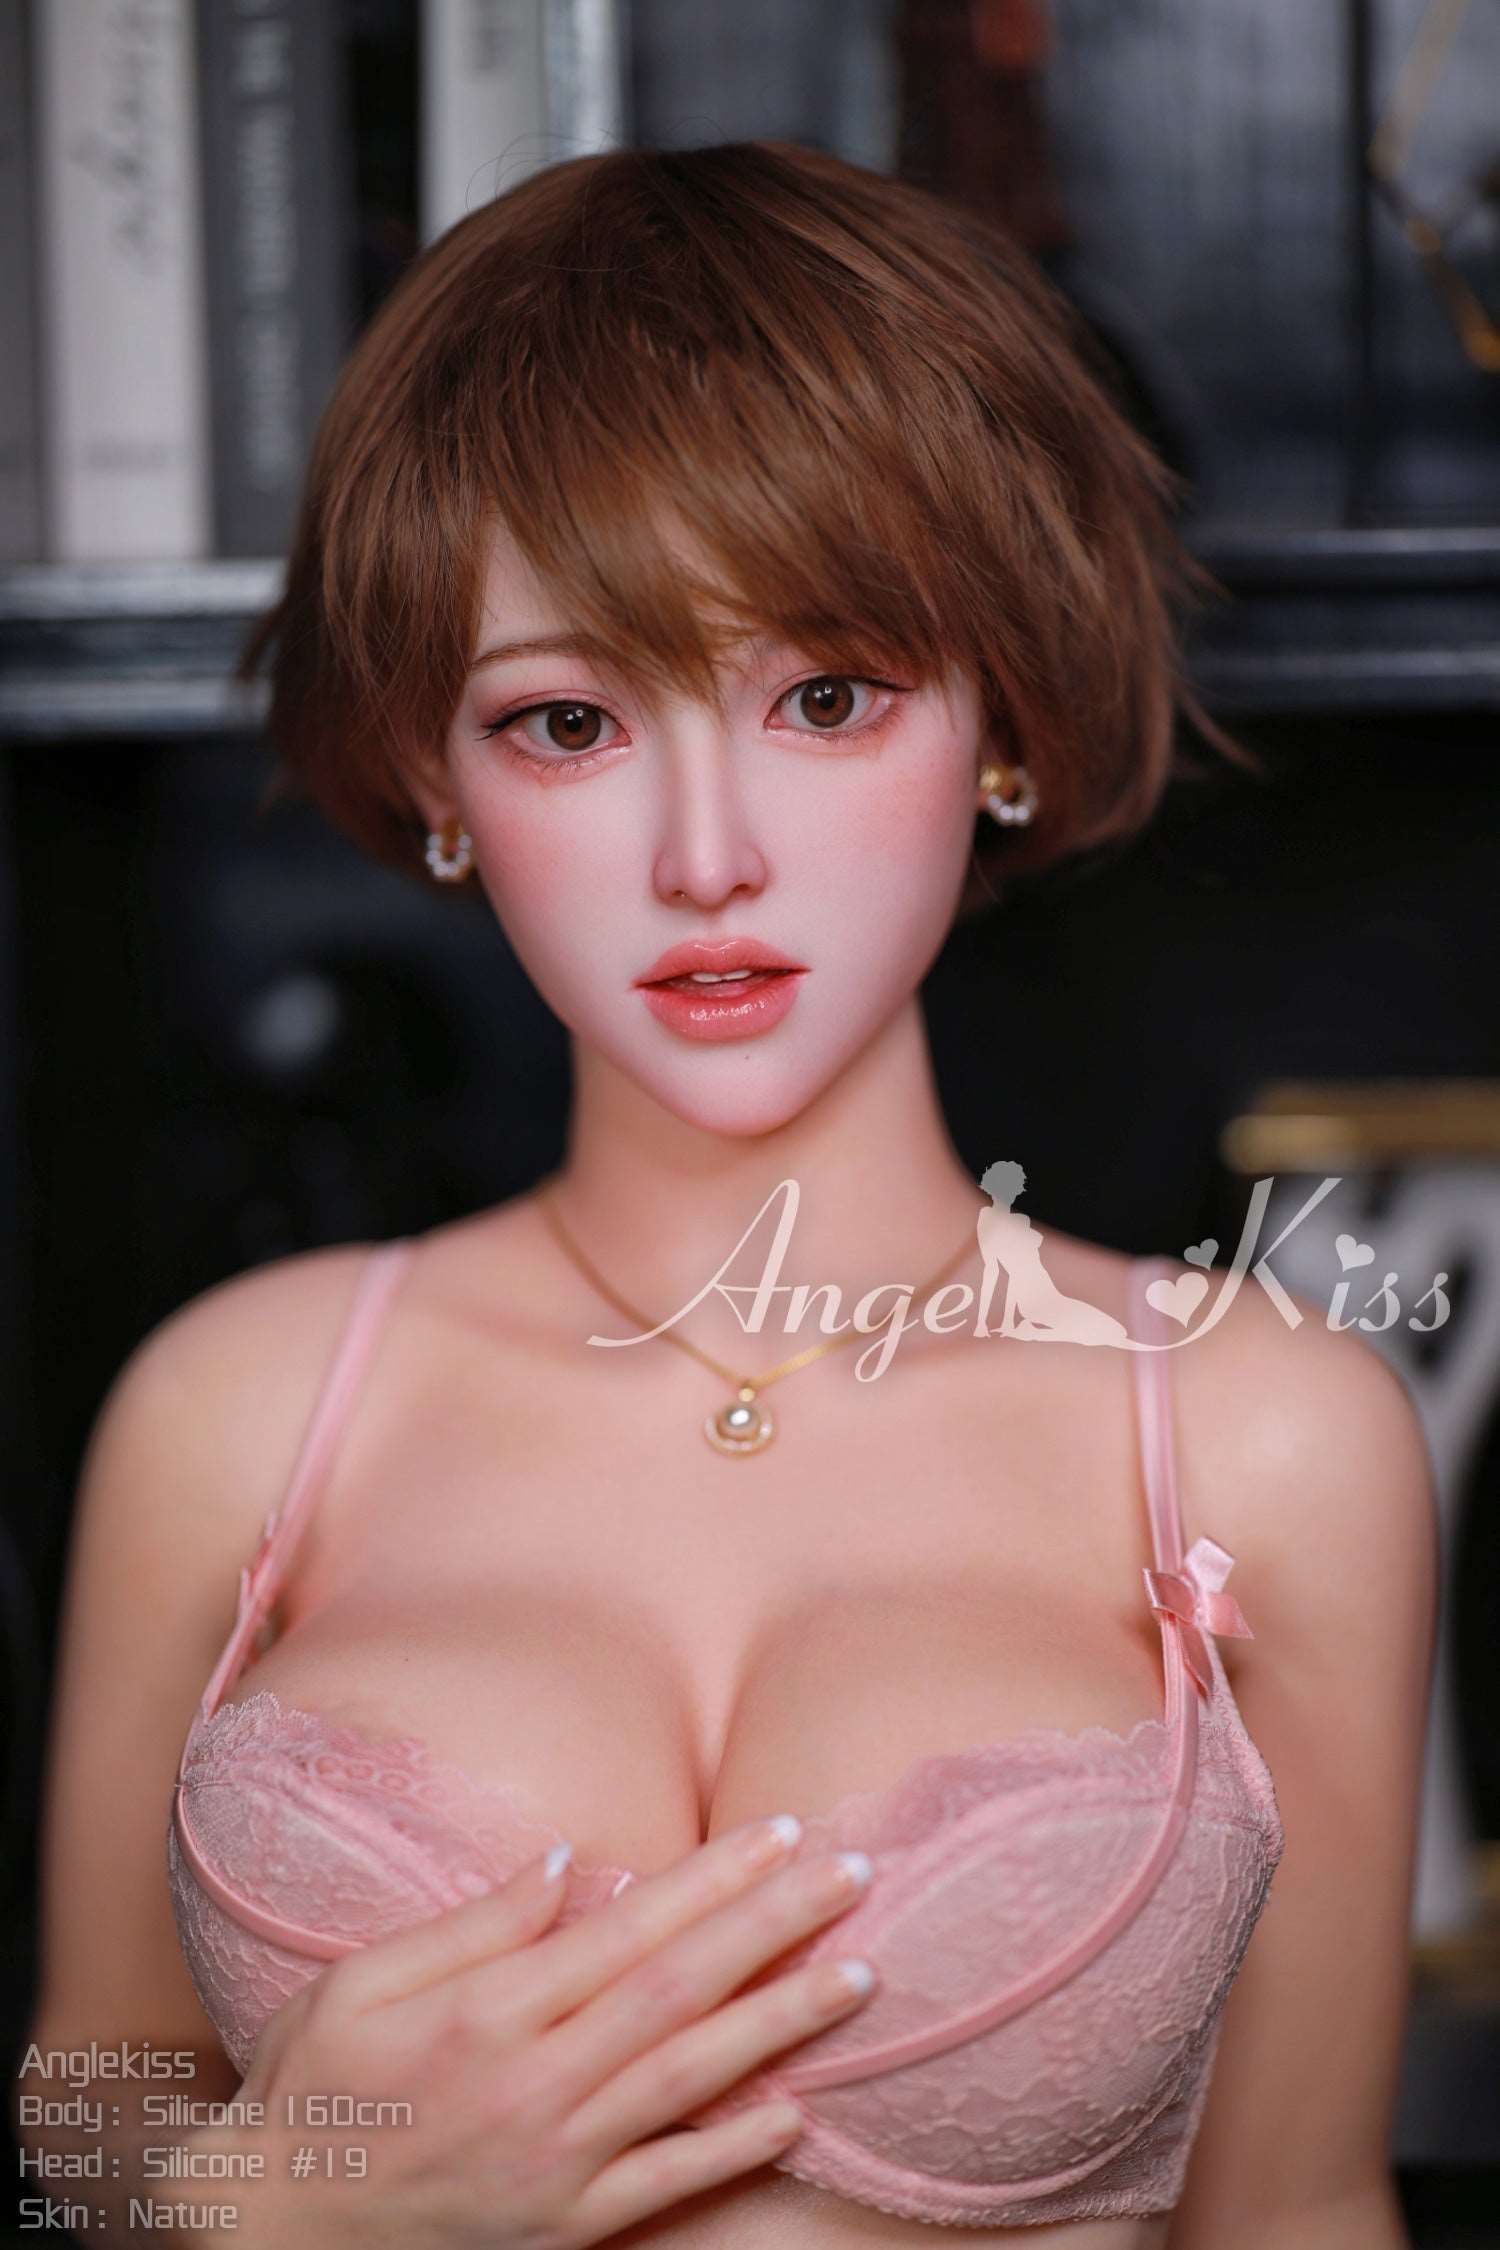 Angelkiss Doll 160 cm Silicone - Xiao | Sex Dolls SG